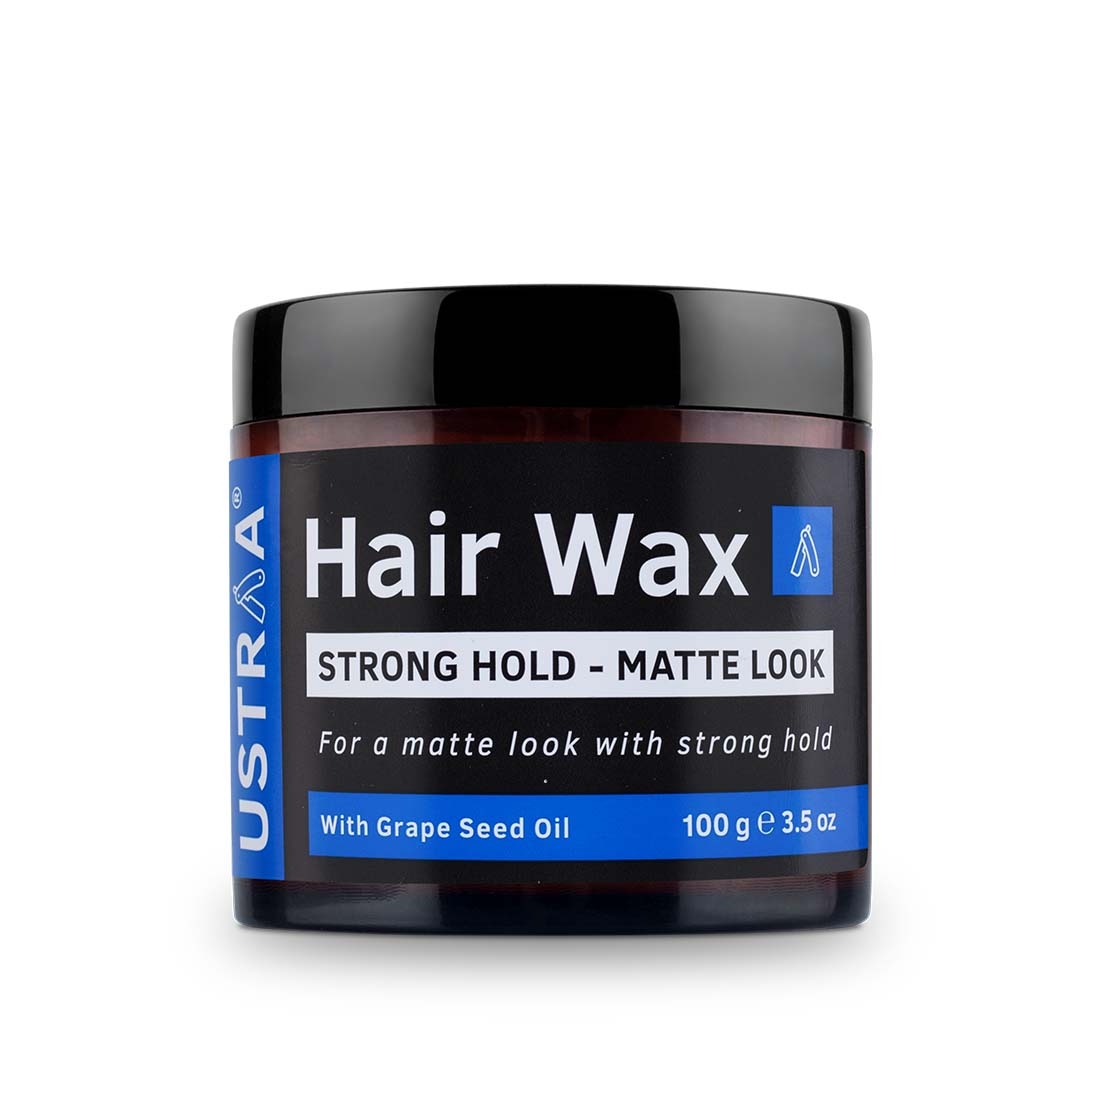 Ustraa | Hair Wax - Strong Hold - Matte Look 100g